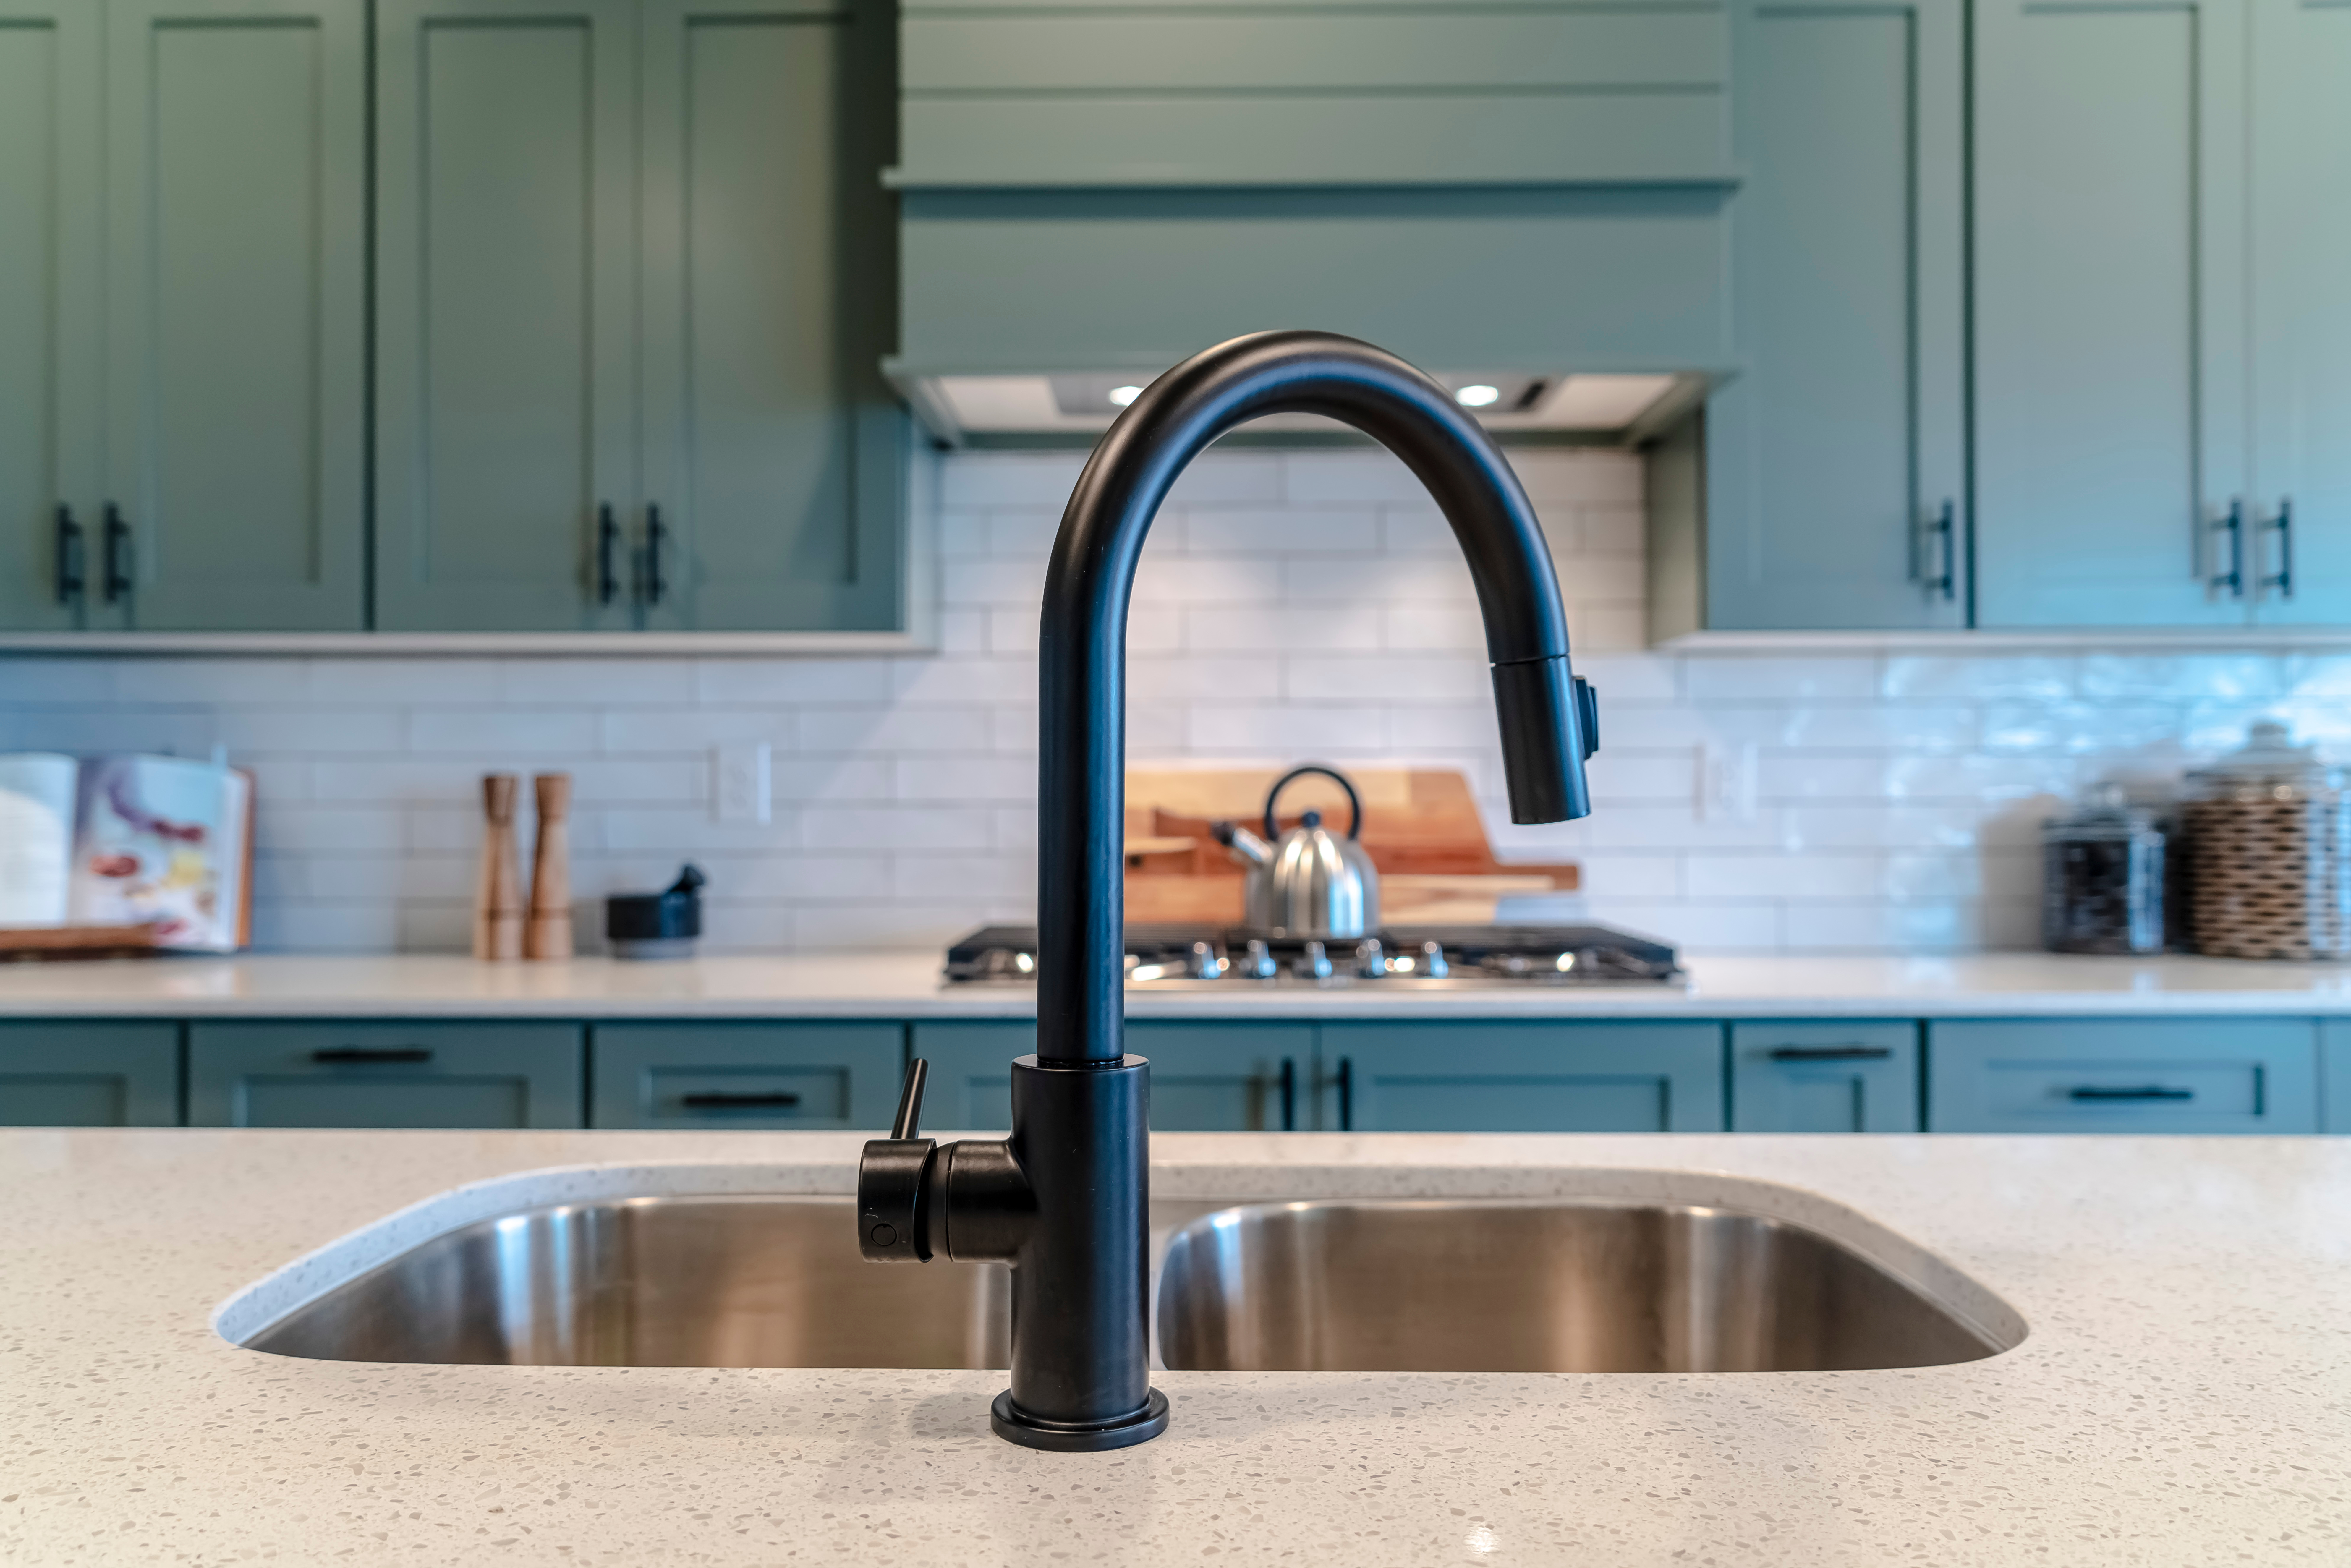 The sink and handles are the most used parts of your kitchen, and this can start to show over time